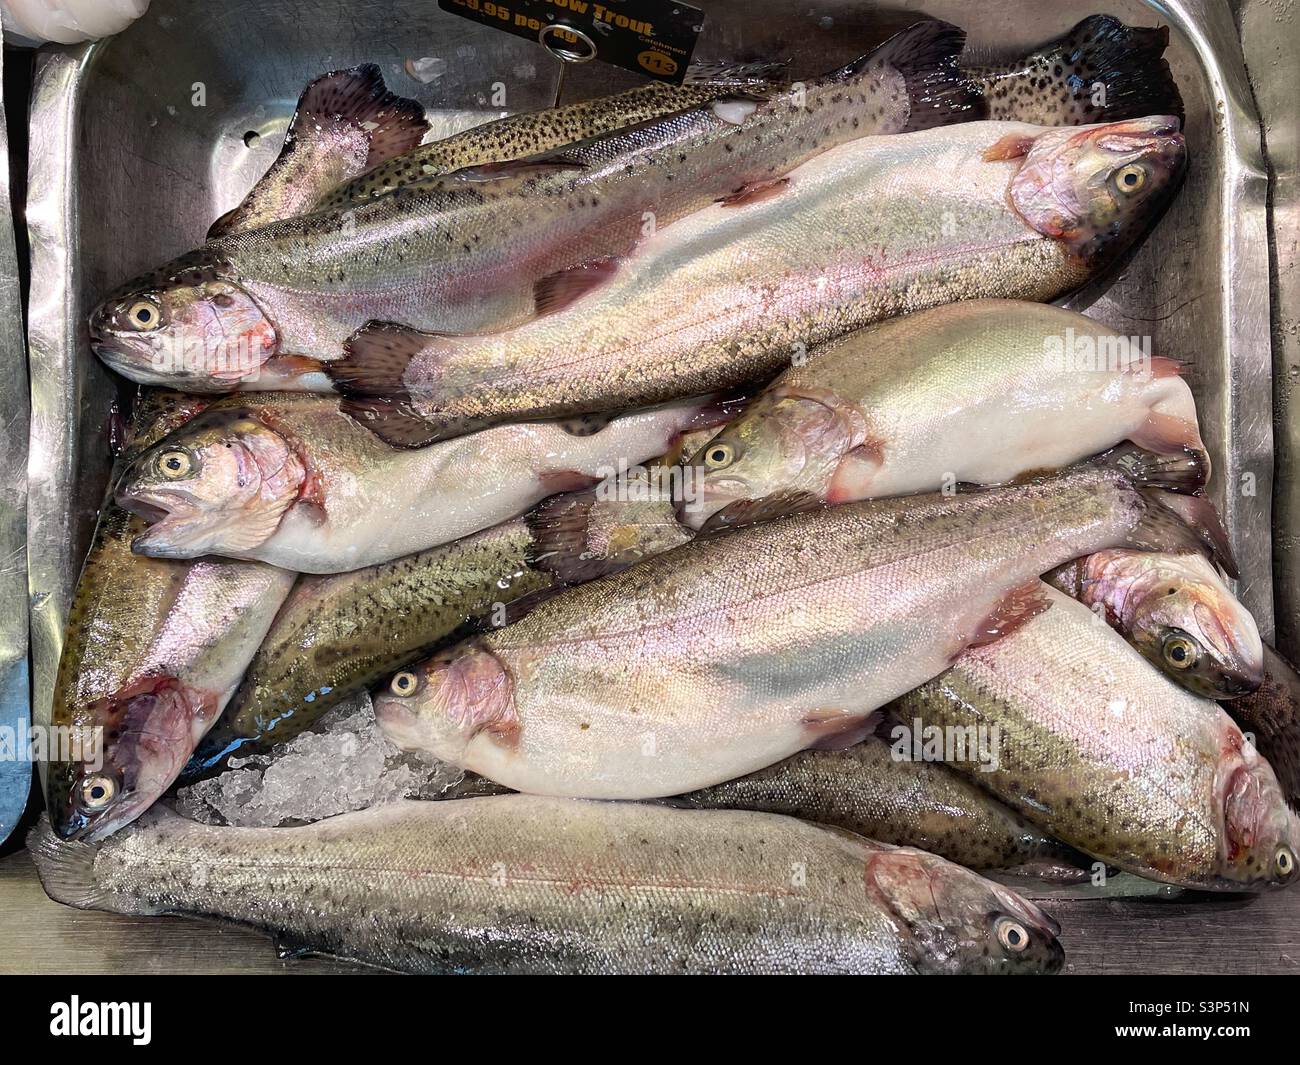 Fresh rainbow trout on display in a fish market Stock Photo